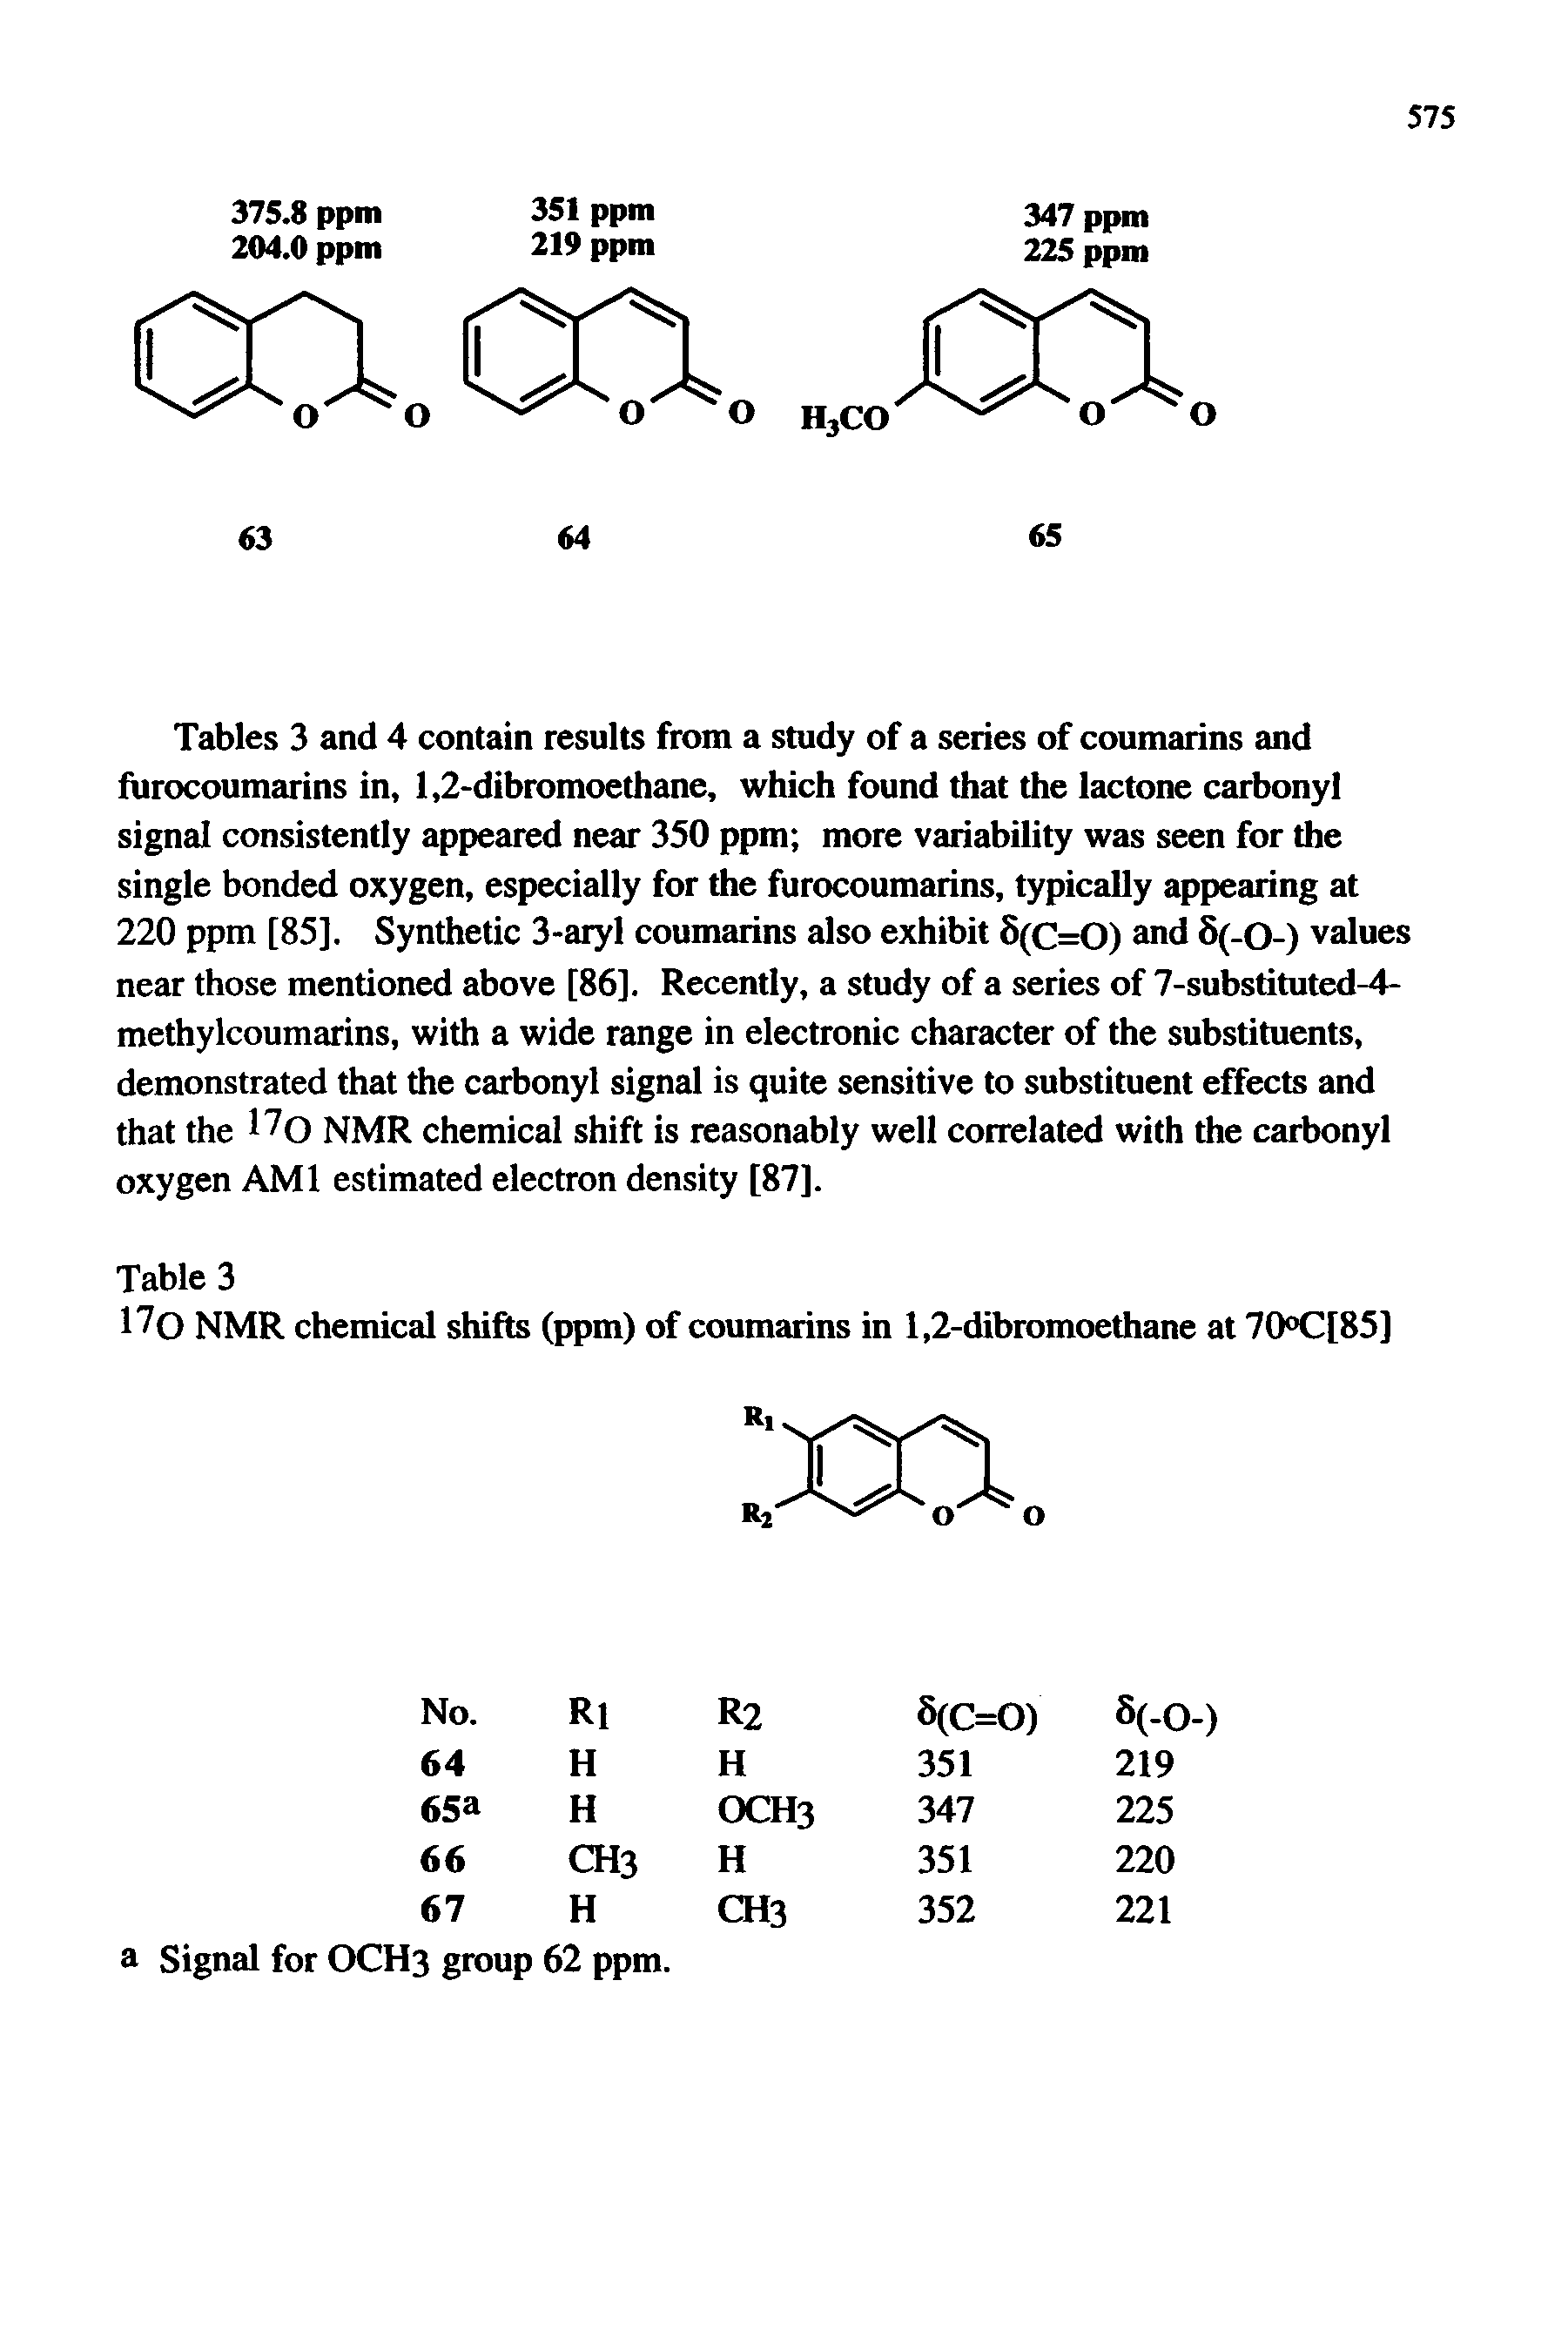 Tables 3 and 4 contain results from a study of a series of coumarins and fiirocoumarins in, 1,2-dibromoethane, which found that the lactone carbonyl signal consistently appeared near 350 ppm more variability was seen for the single bonded oxygen, especially for the furocoumarins, typically appearing at 220 ppm [85]. Synthetic 3-aryl coumarins also exhibit 6(C=0) and 5(-0-) values near those mentioned above [86]. Recently, a study of a series of 7-substituted-4-methylcoumarins, with a wide range in electronic character of the substituents, demonstrated that the carbonyl signal is quite sensitive to substituent effects and that the NMR chemical shift is reasonably well correlated with the carbonyl oxygen AMI estimated electron density [87].